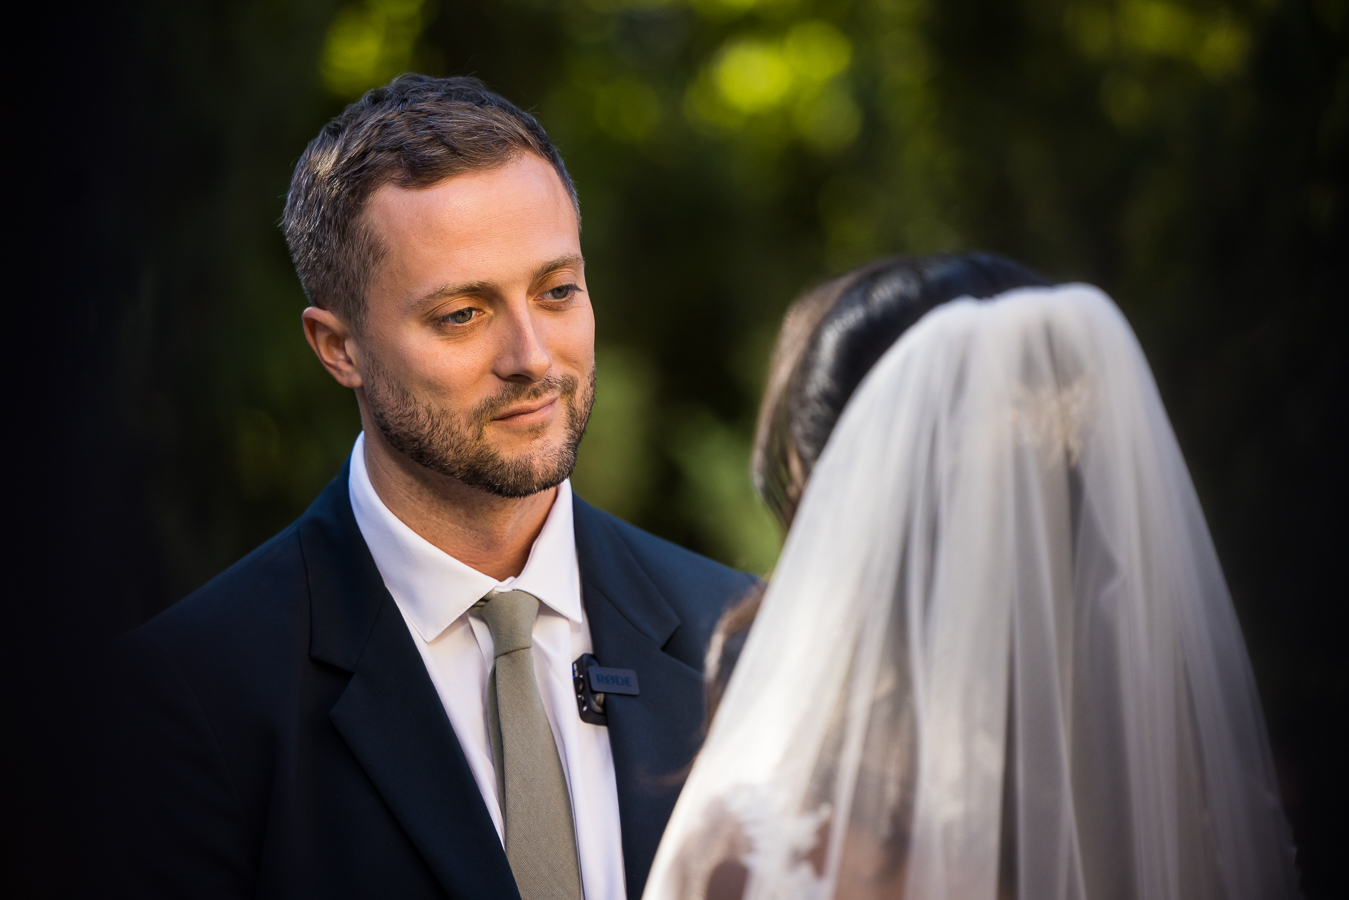 close up portrait of the groom as he stares into his Ethiopian bride's eyes with a smile during their outdoor multicultural wedding ceremony at st francis hall captured by wedding photographer, Lisa Rhinehart 